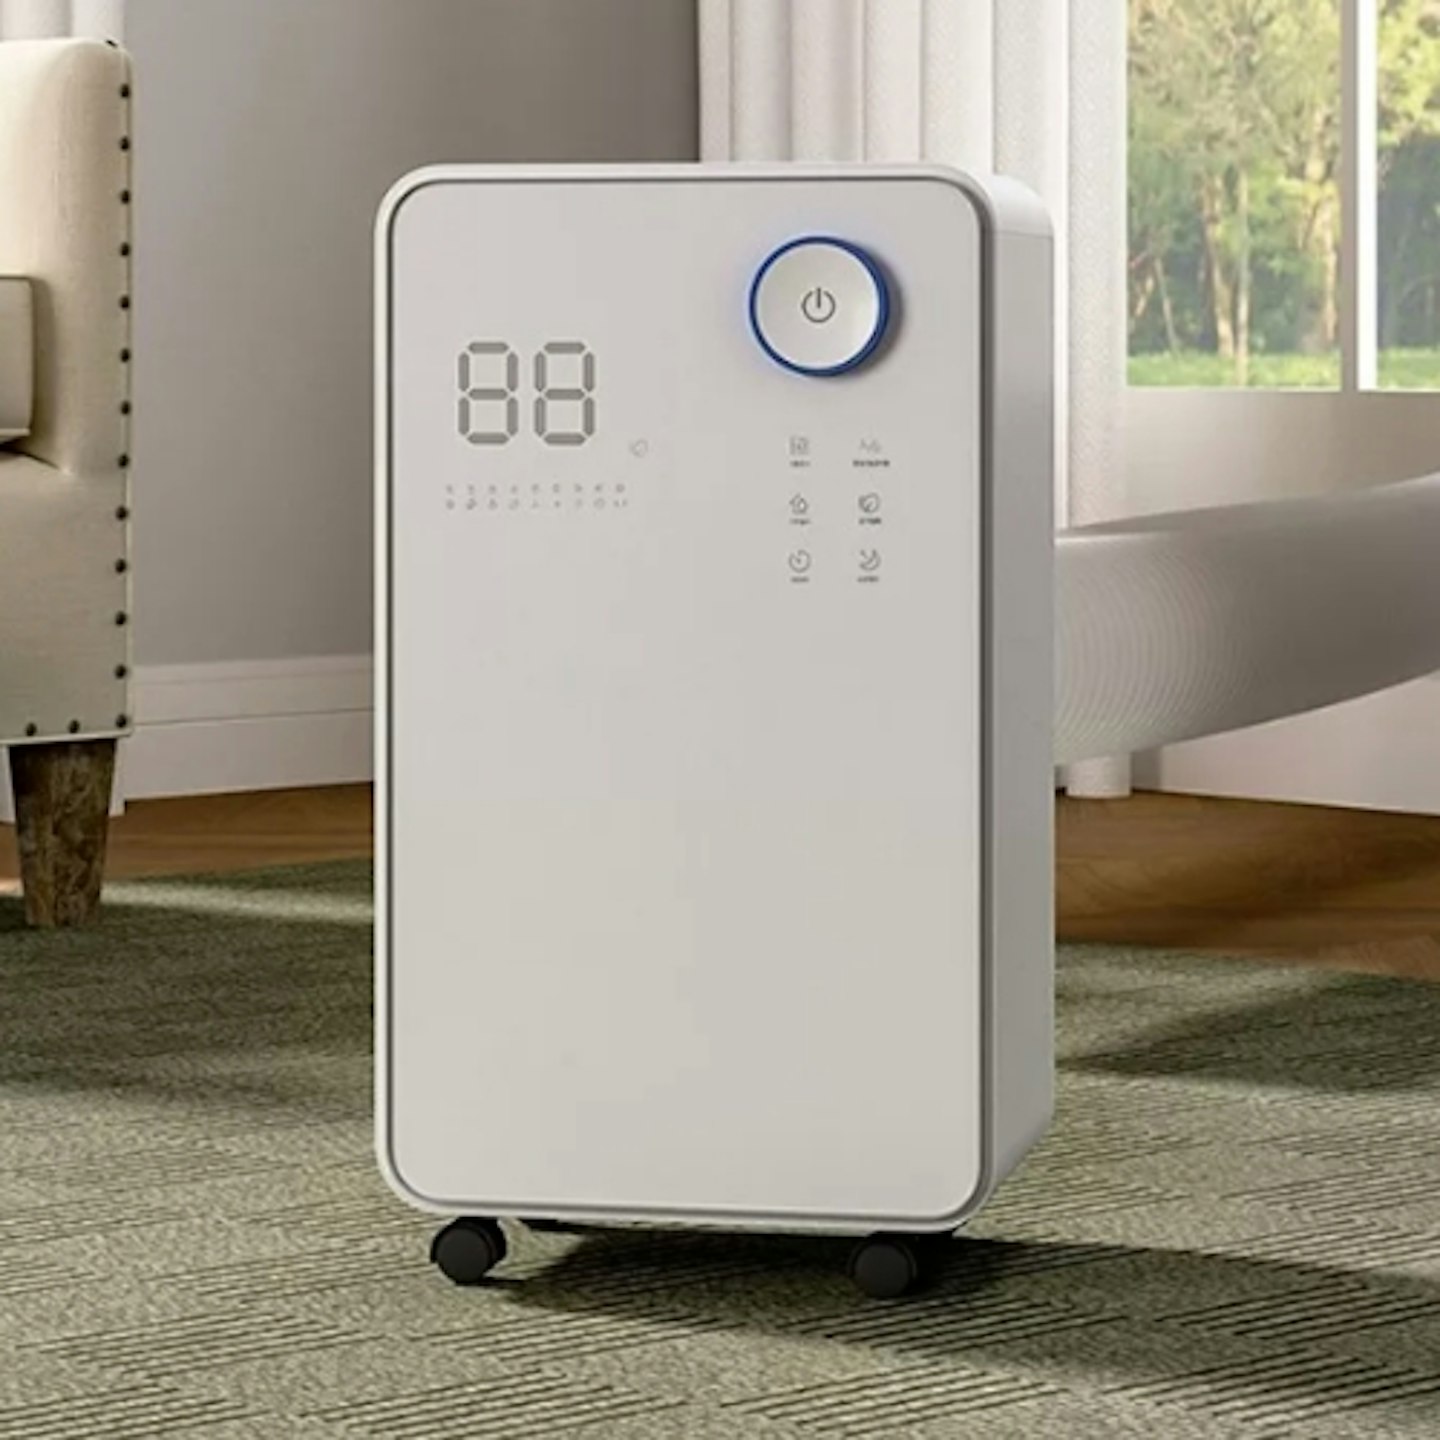 Living and Home 16L WiFi Dehumidifier with Wheels